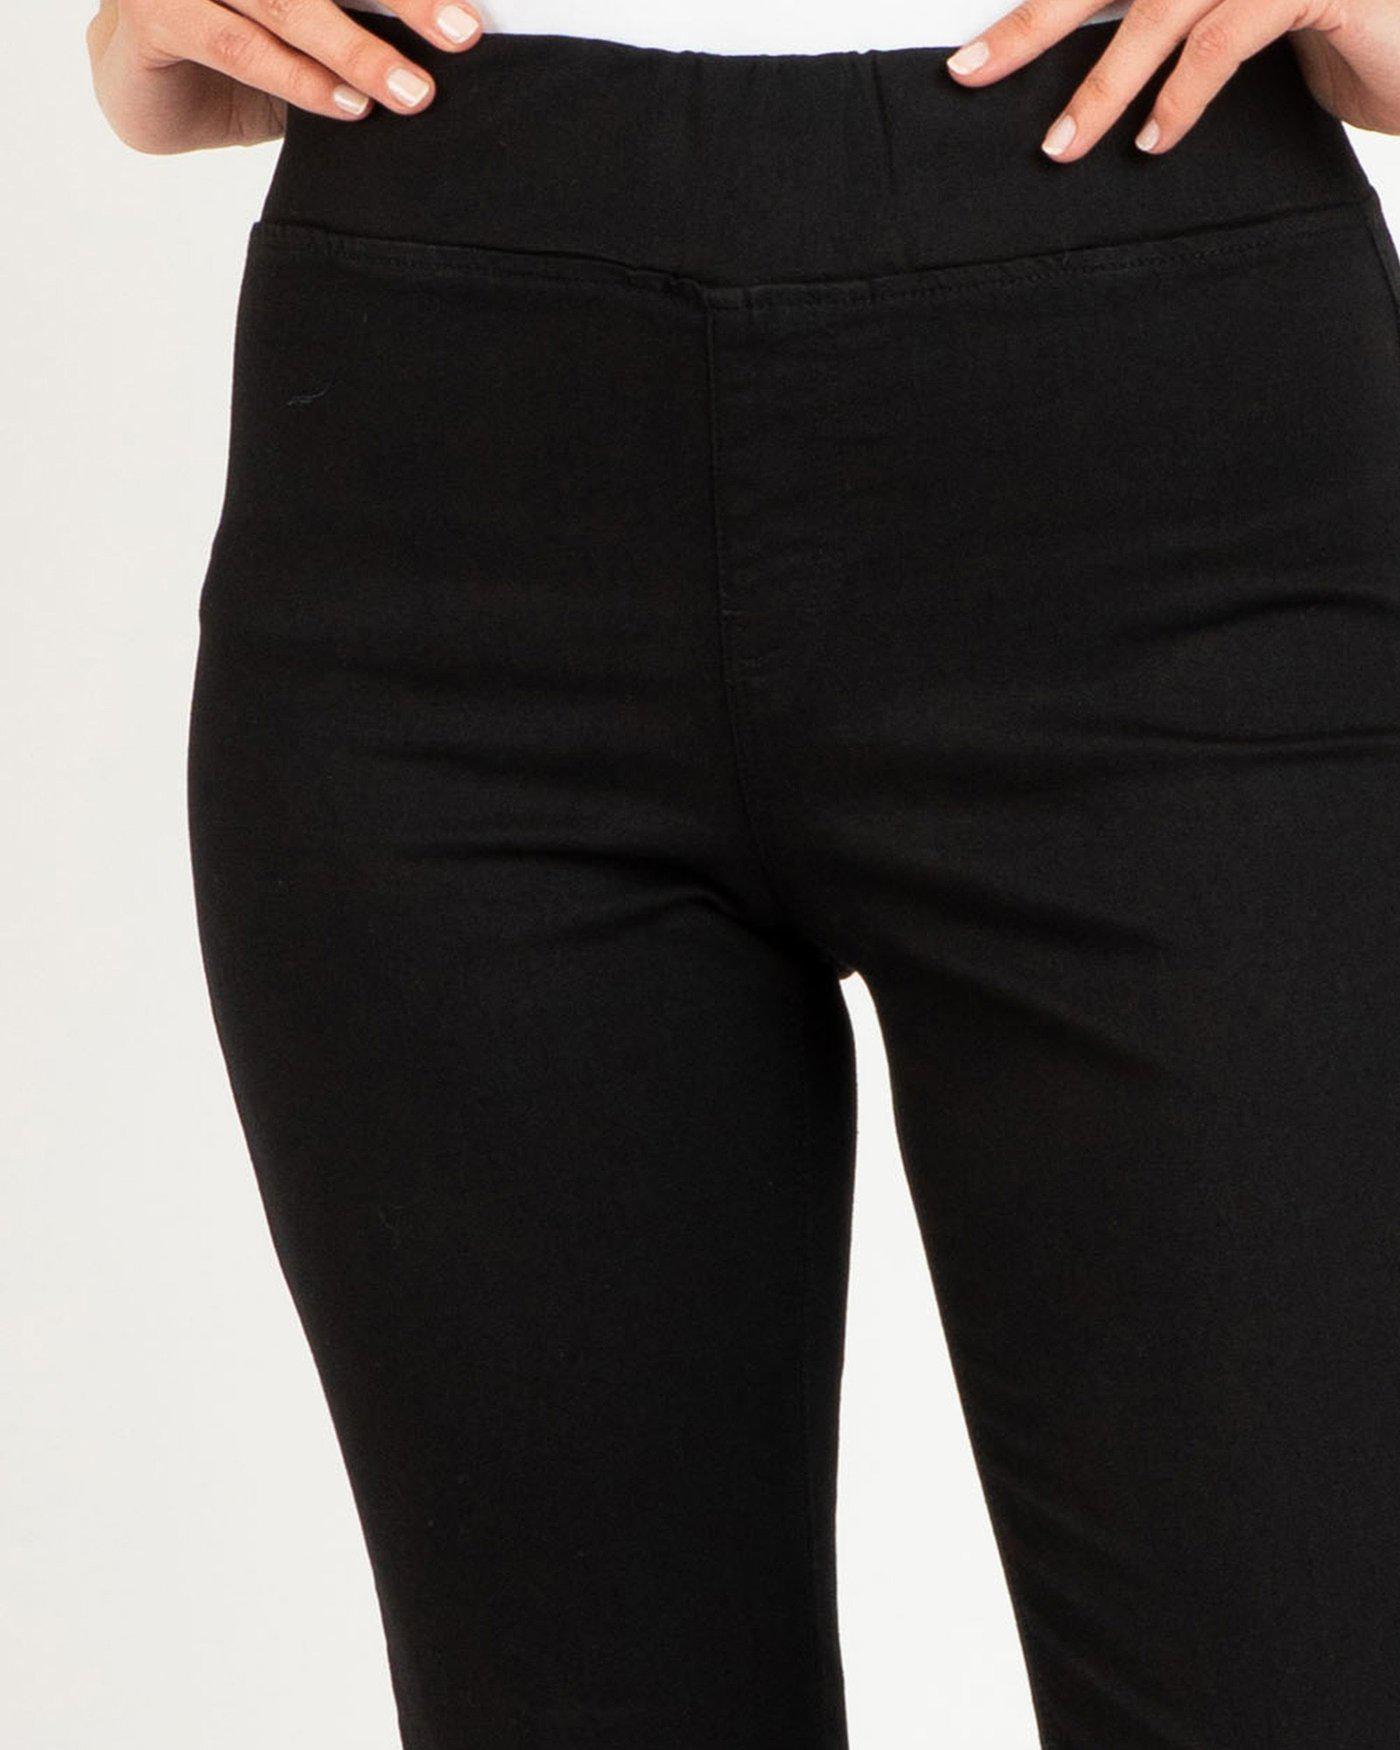 Miller Stretch Jean - Black - Betty Basics - FUDGE Gifts Home Lifestyle